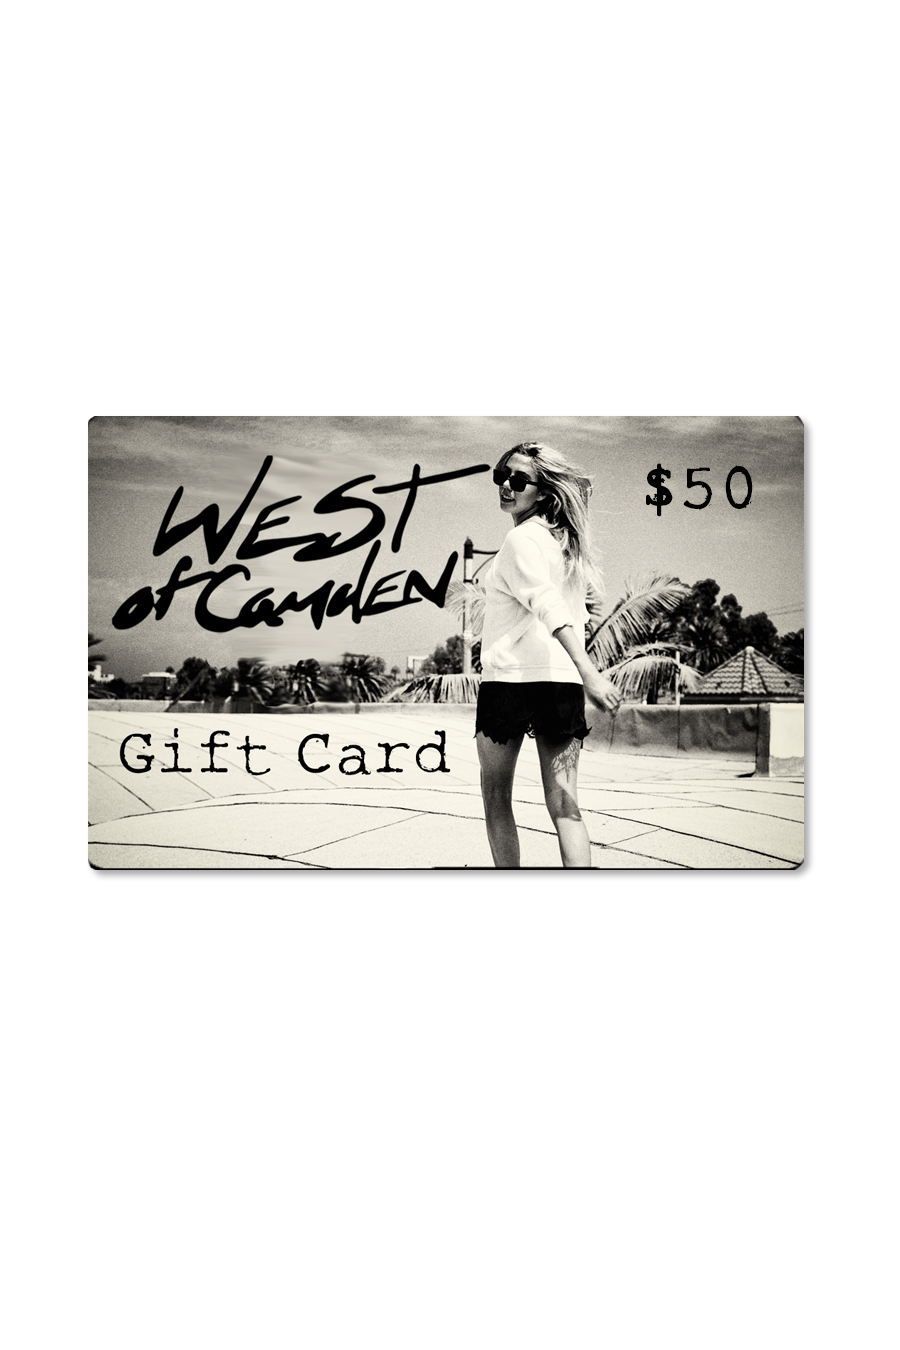 Gift Card - West of Camden - Main Image Number 4 of 5